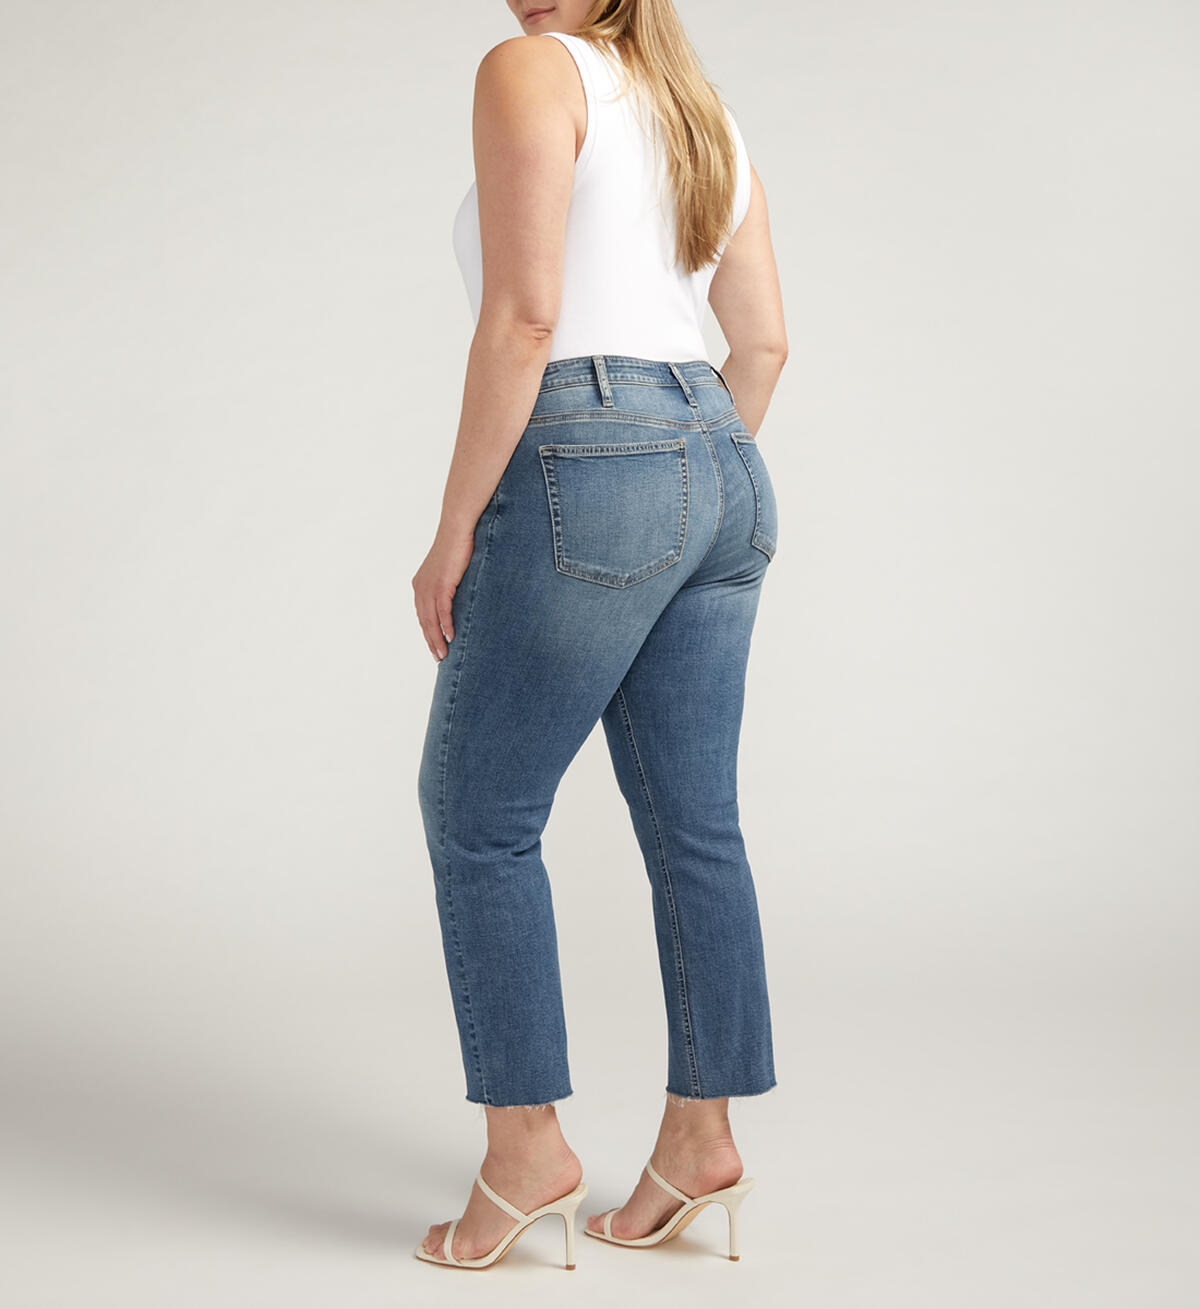 Most Wanted Mid Rise Straight Jeans Plus Size, , hi-res image number 1